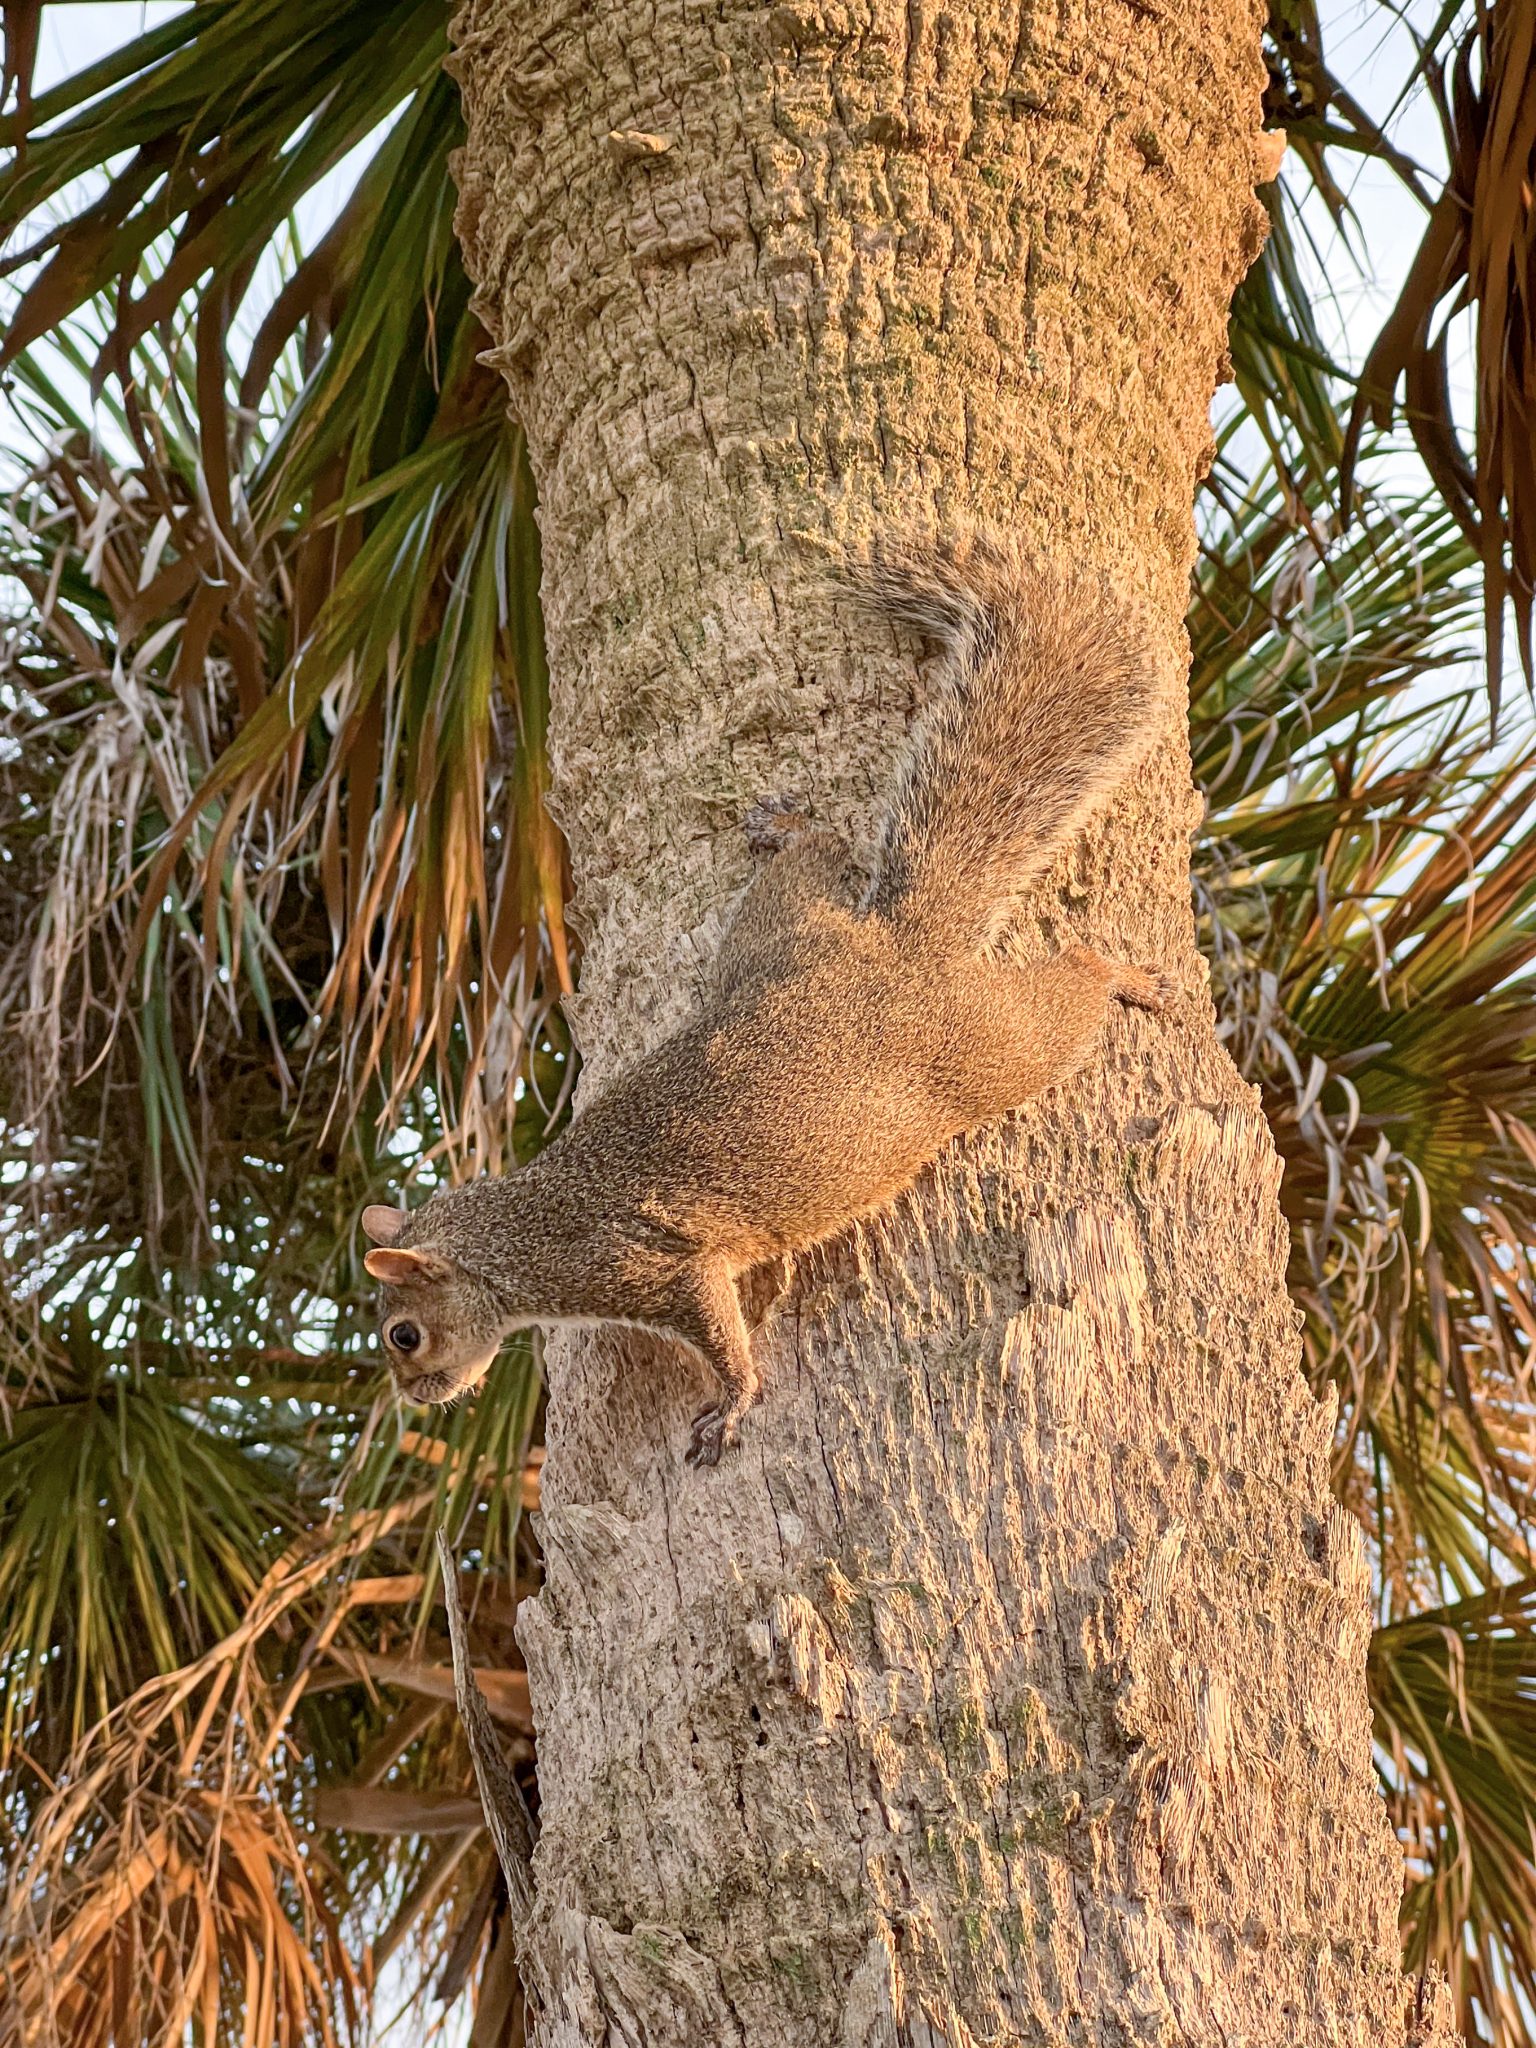 Squirrel on a palm tree at dusk